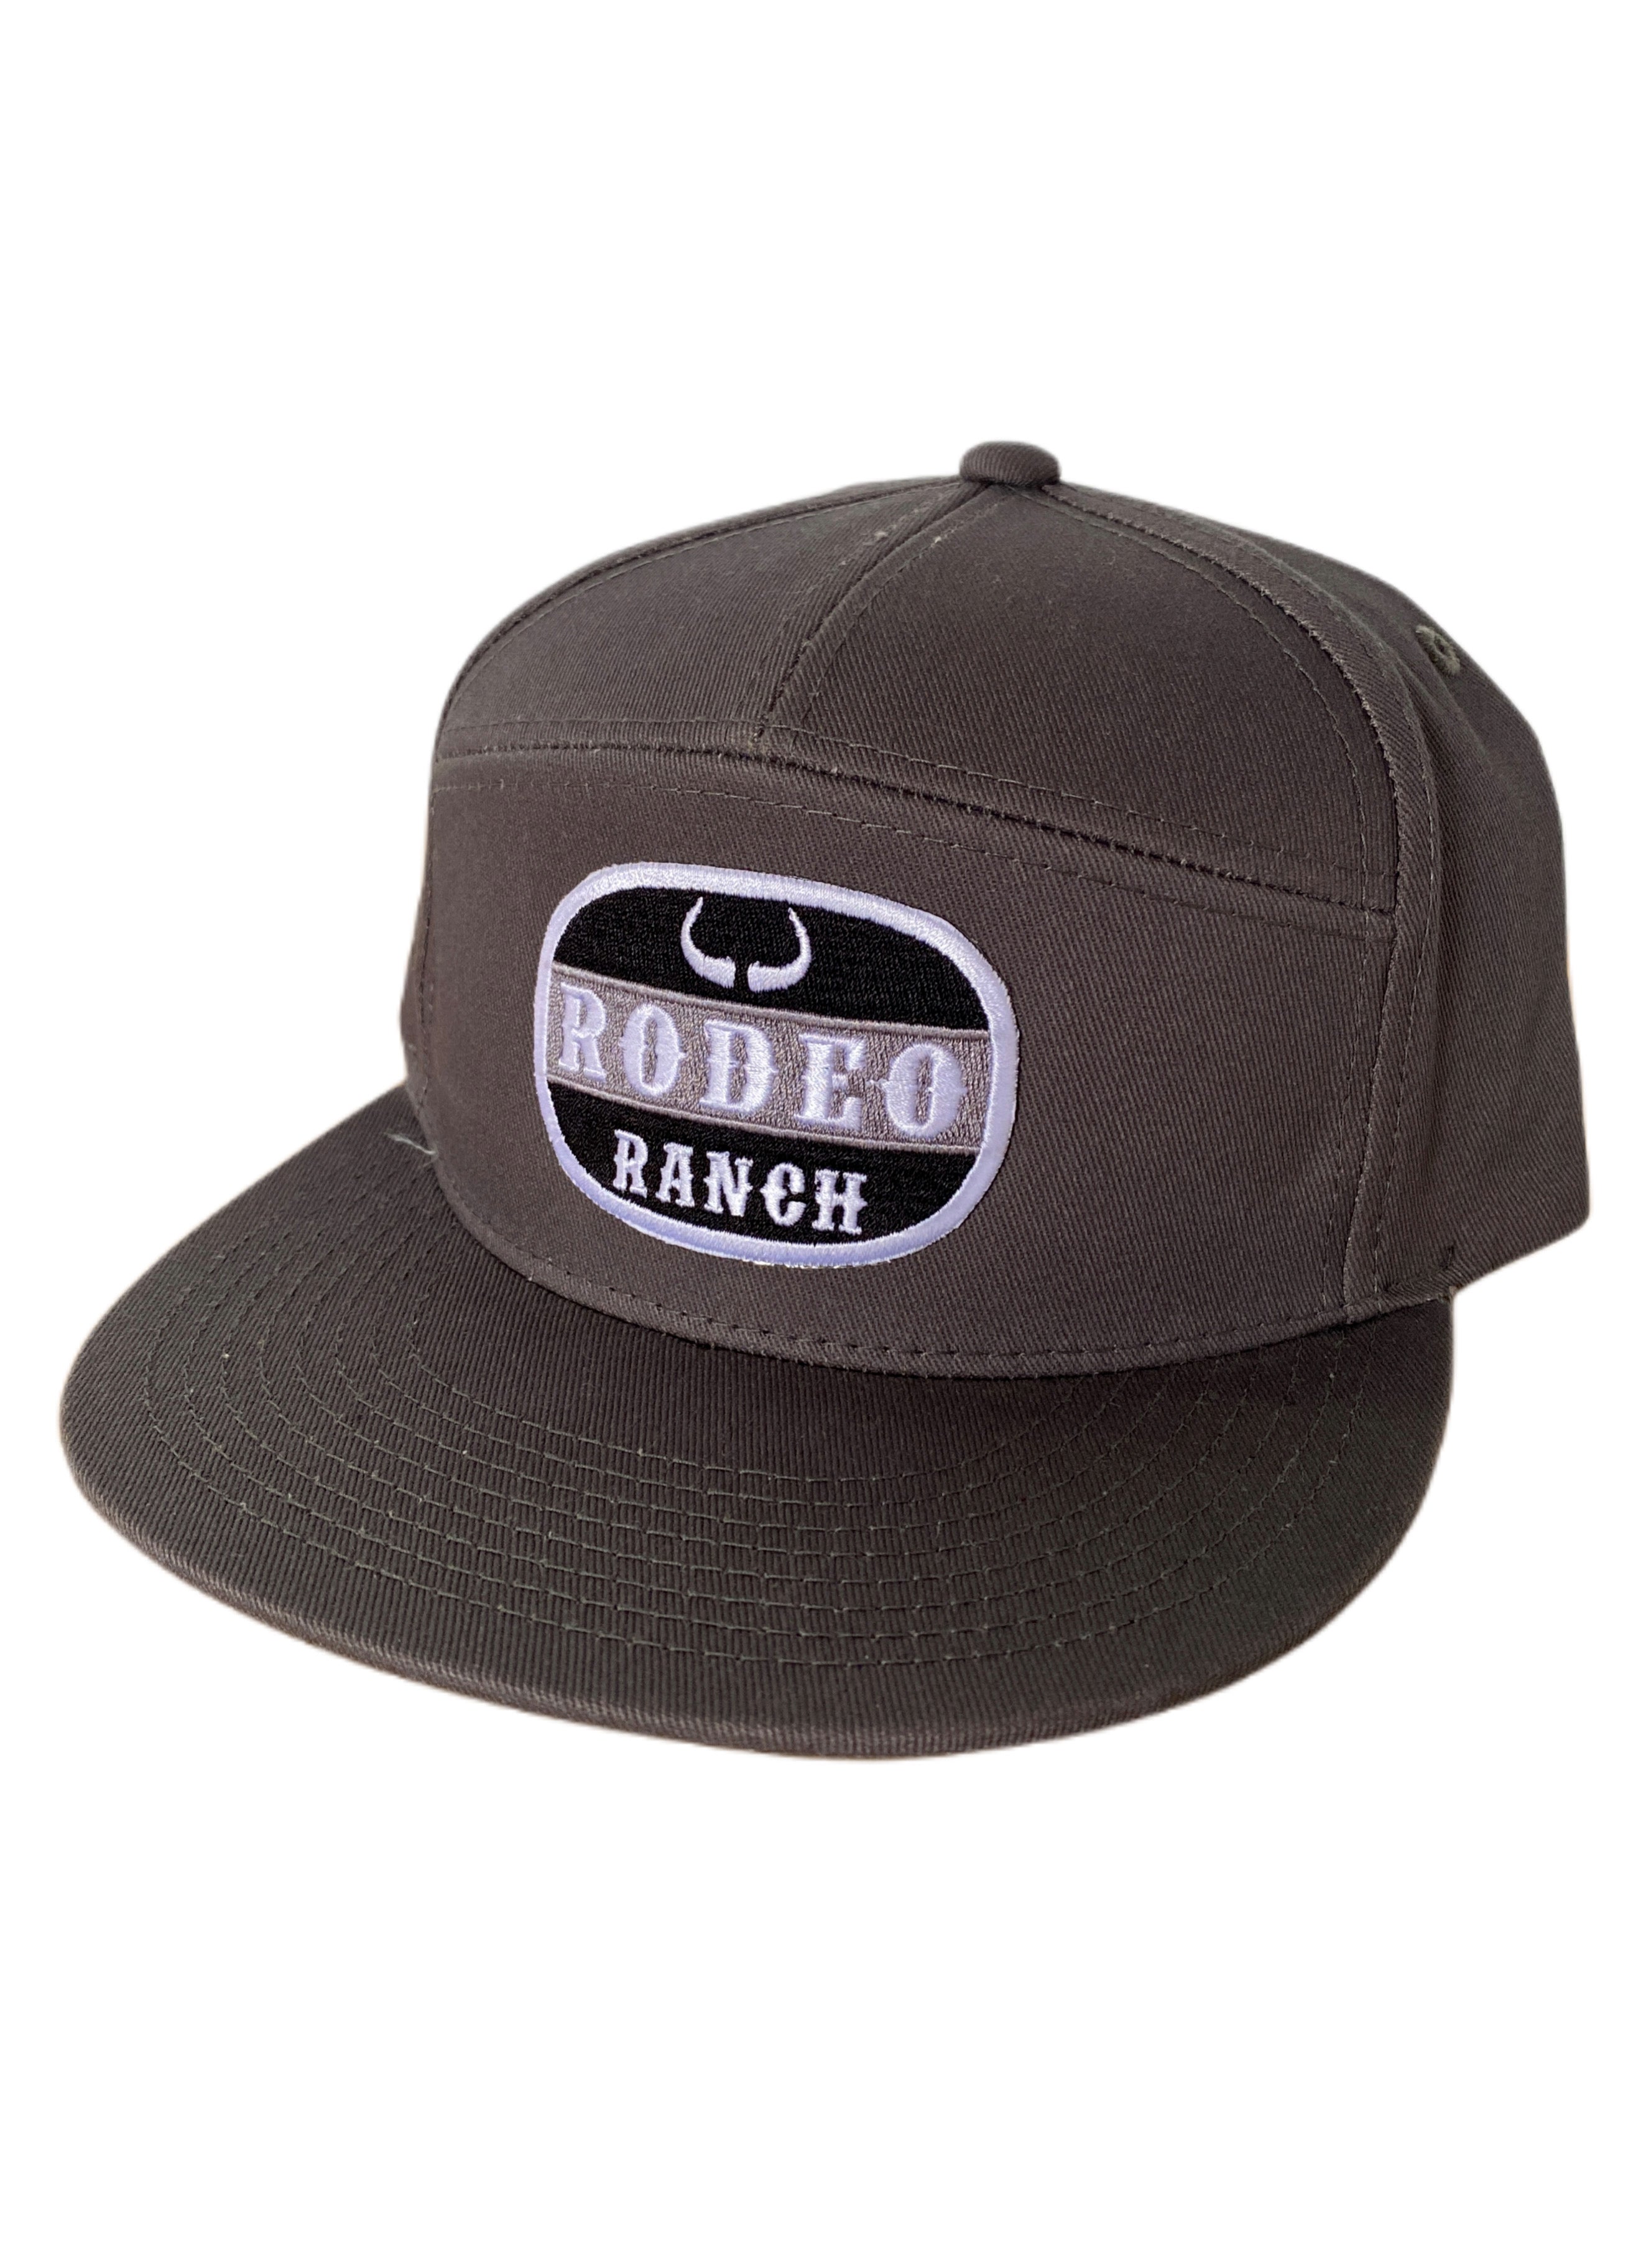 Rodeo Ranch Stockyards 7 Panel Flat Brim Hat - Charcoal – Rodeo Ranch ...